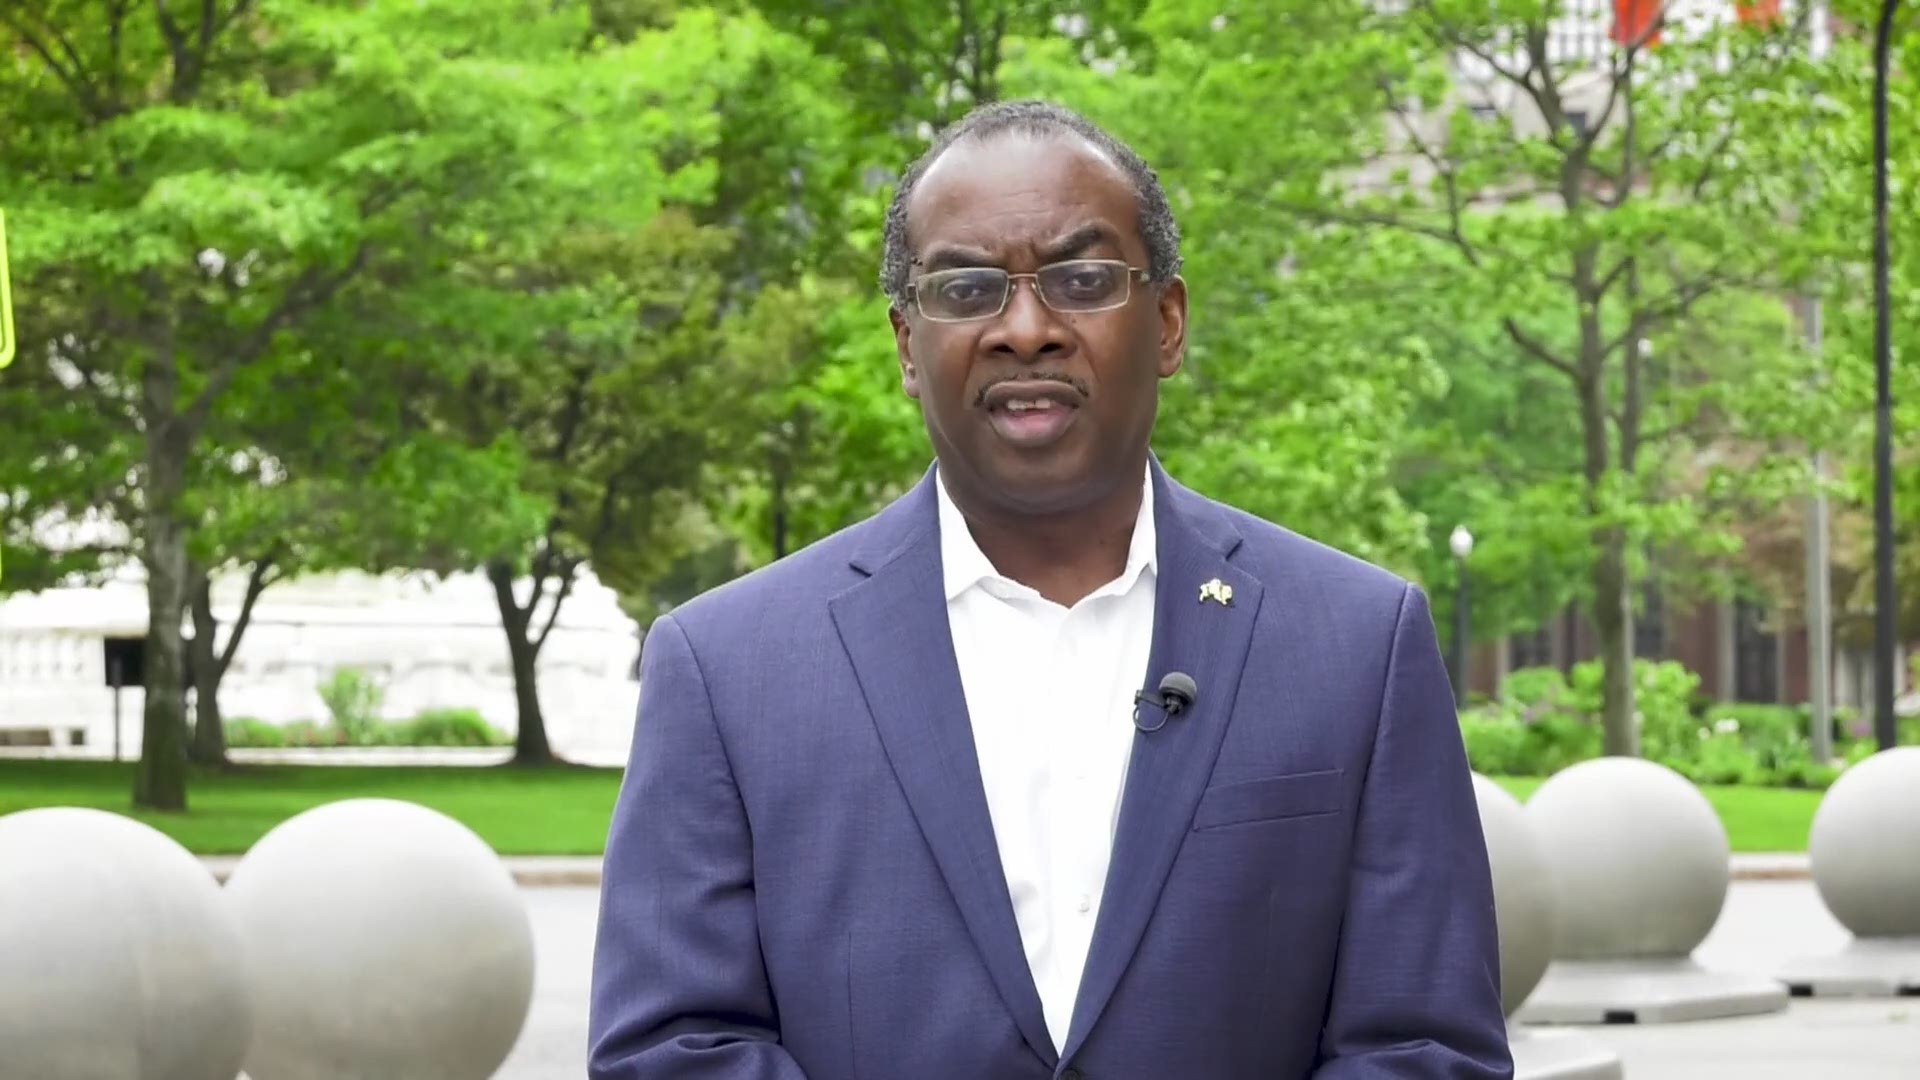 Buffalo Mayor Byron Brown issued a video message to the community on Saturday, saying peaceful protest is a way for people to express their hurt and outrage.